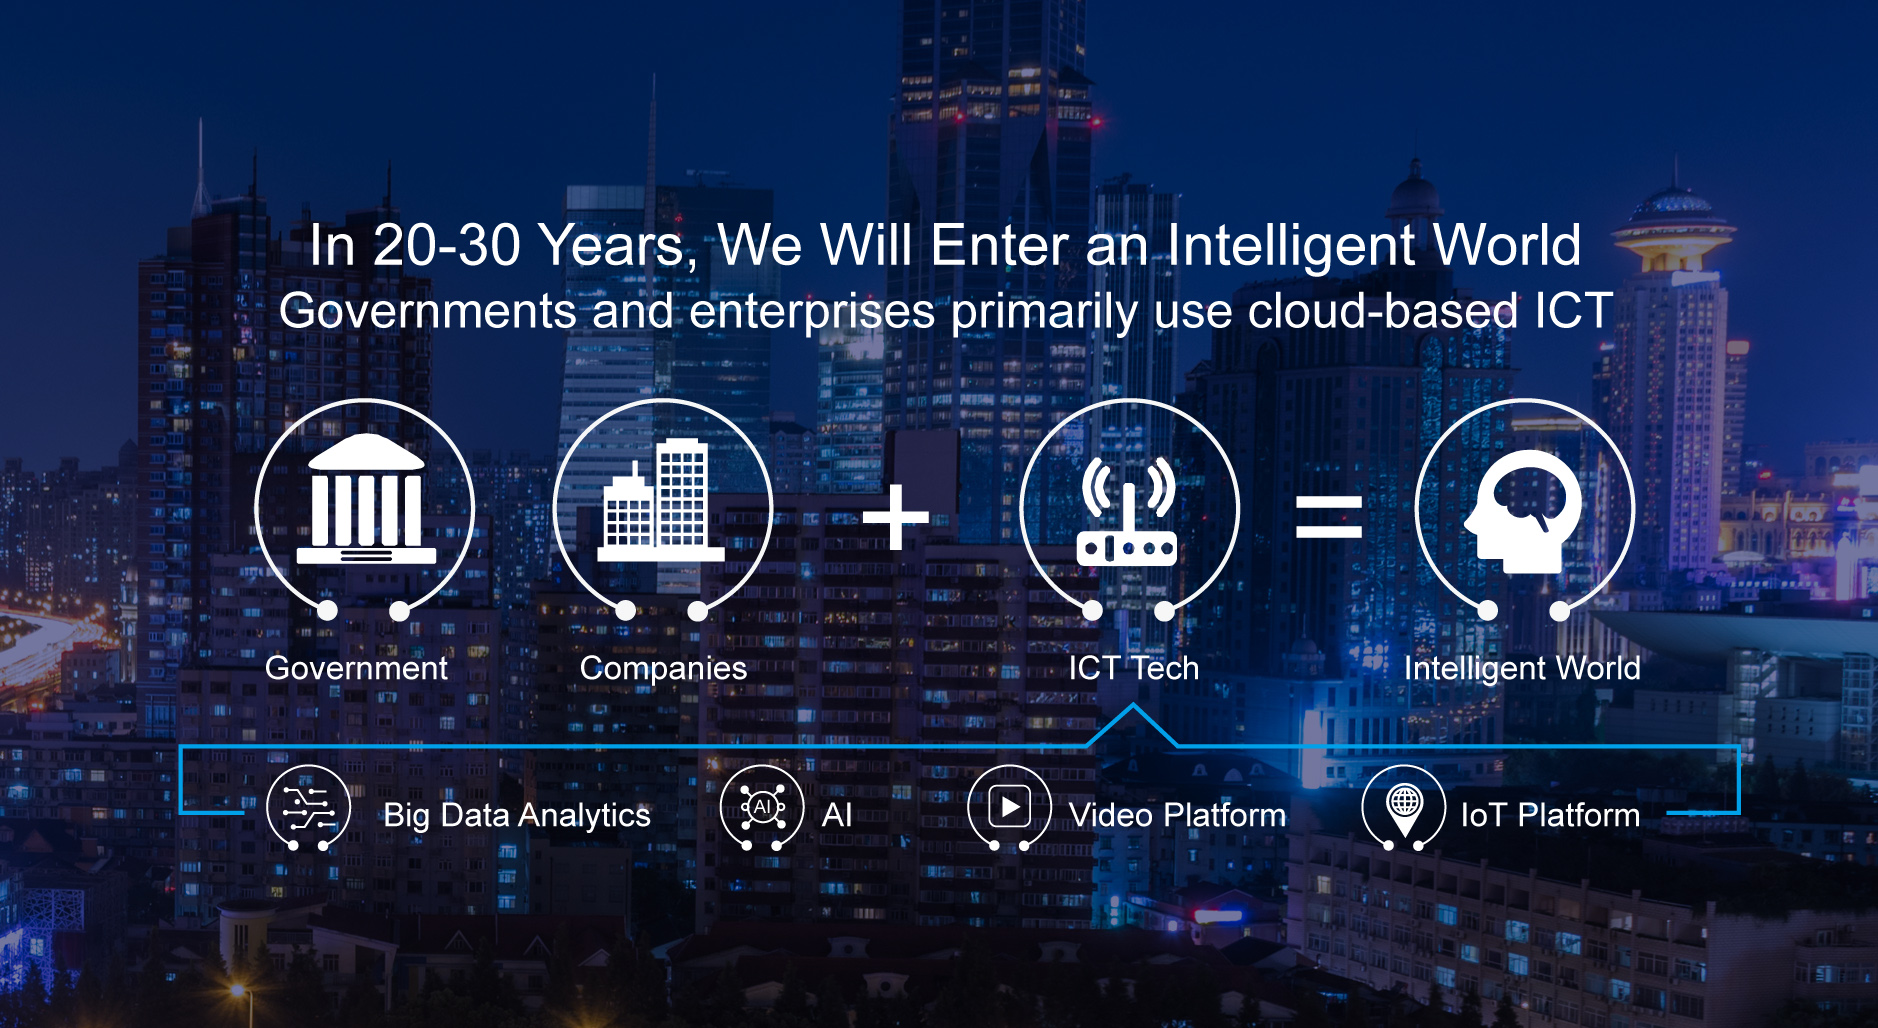 Skyline background with text and images in the front explaining that we will enter an intelligent world in 20–30 years